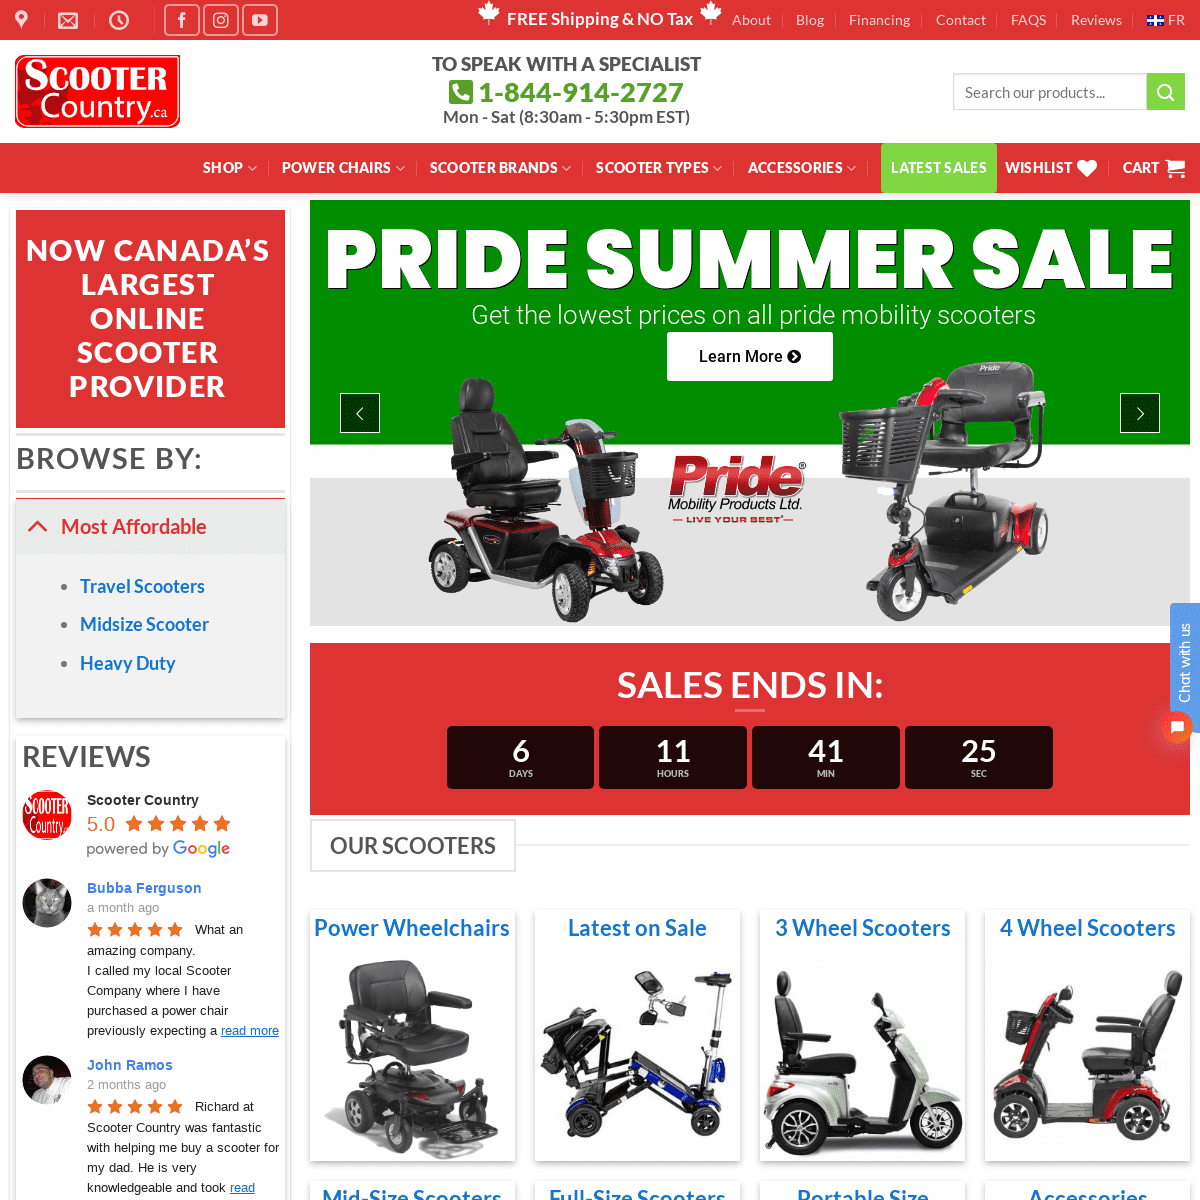 Best Electric Mobility Scooters for Sale in Canada | Scooter Country